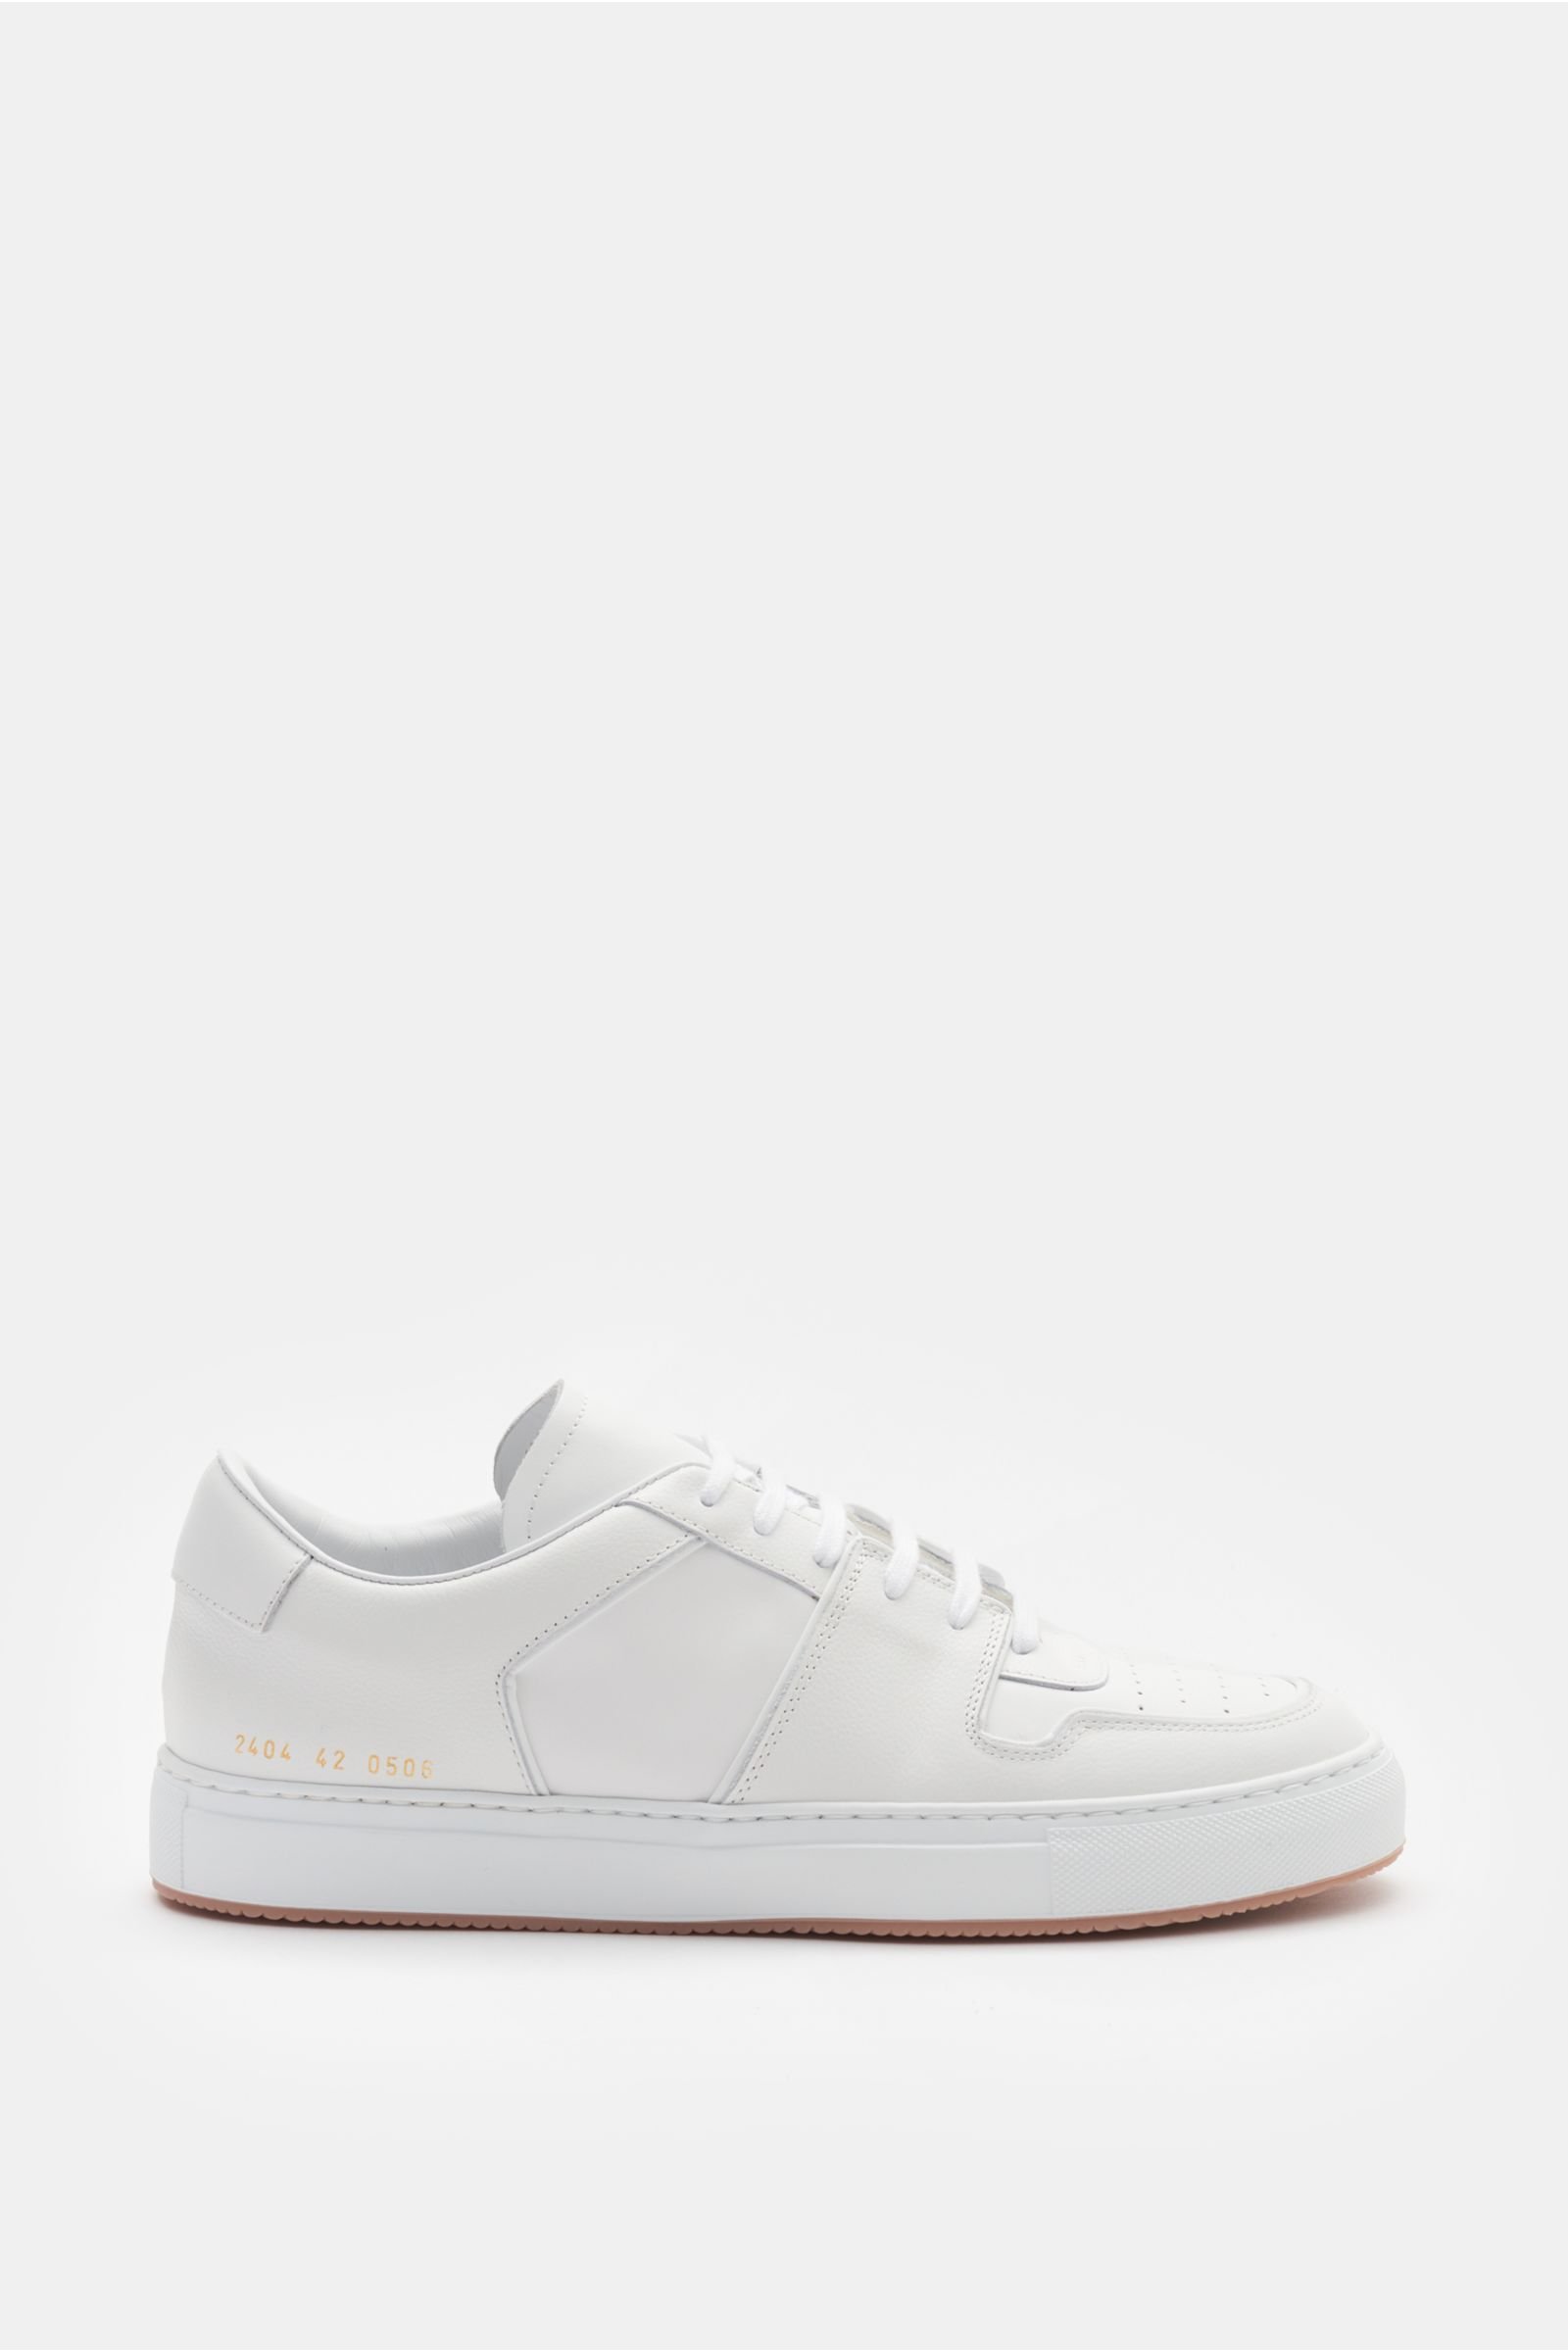 Common Projects Achilles Sneakers Textured White Leather - size 41 - BNWB,  £390 | eBay